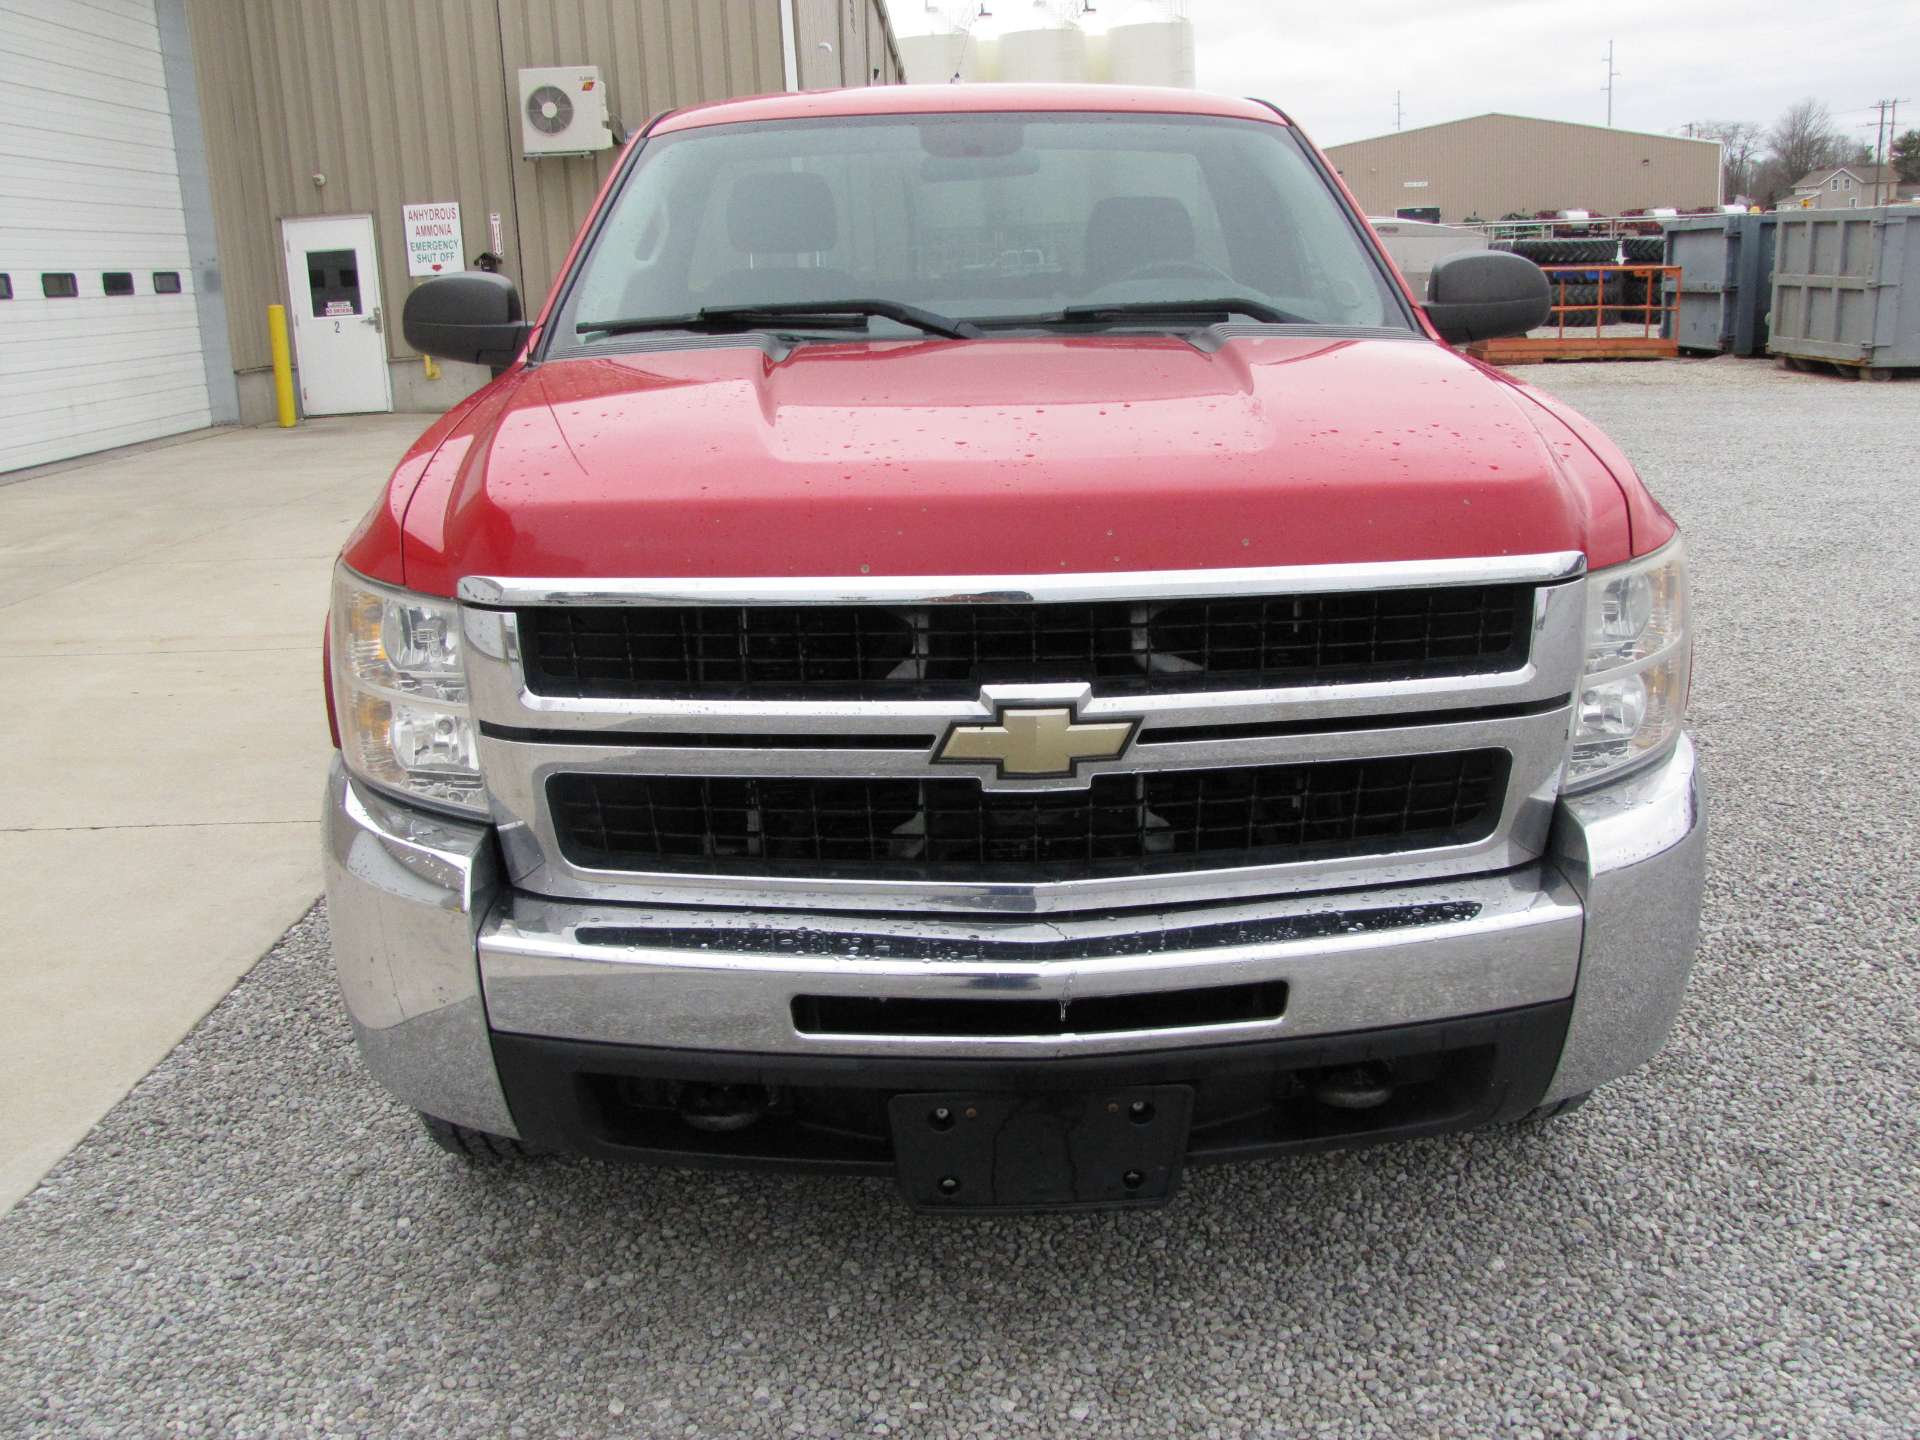 2009 Chevy 2500 HD LT pickup truck - Image 16 of 69